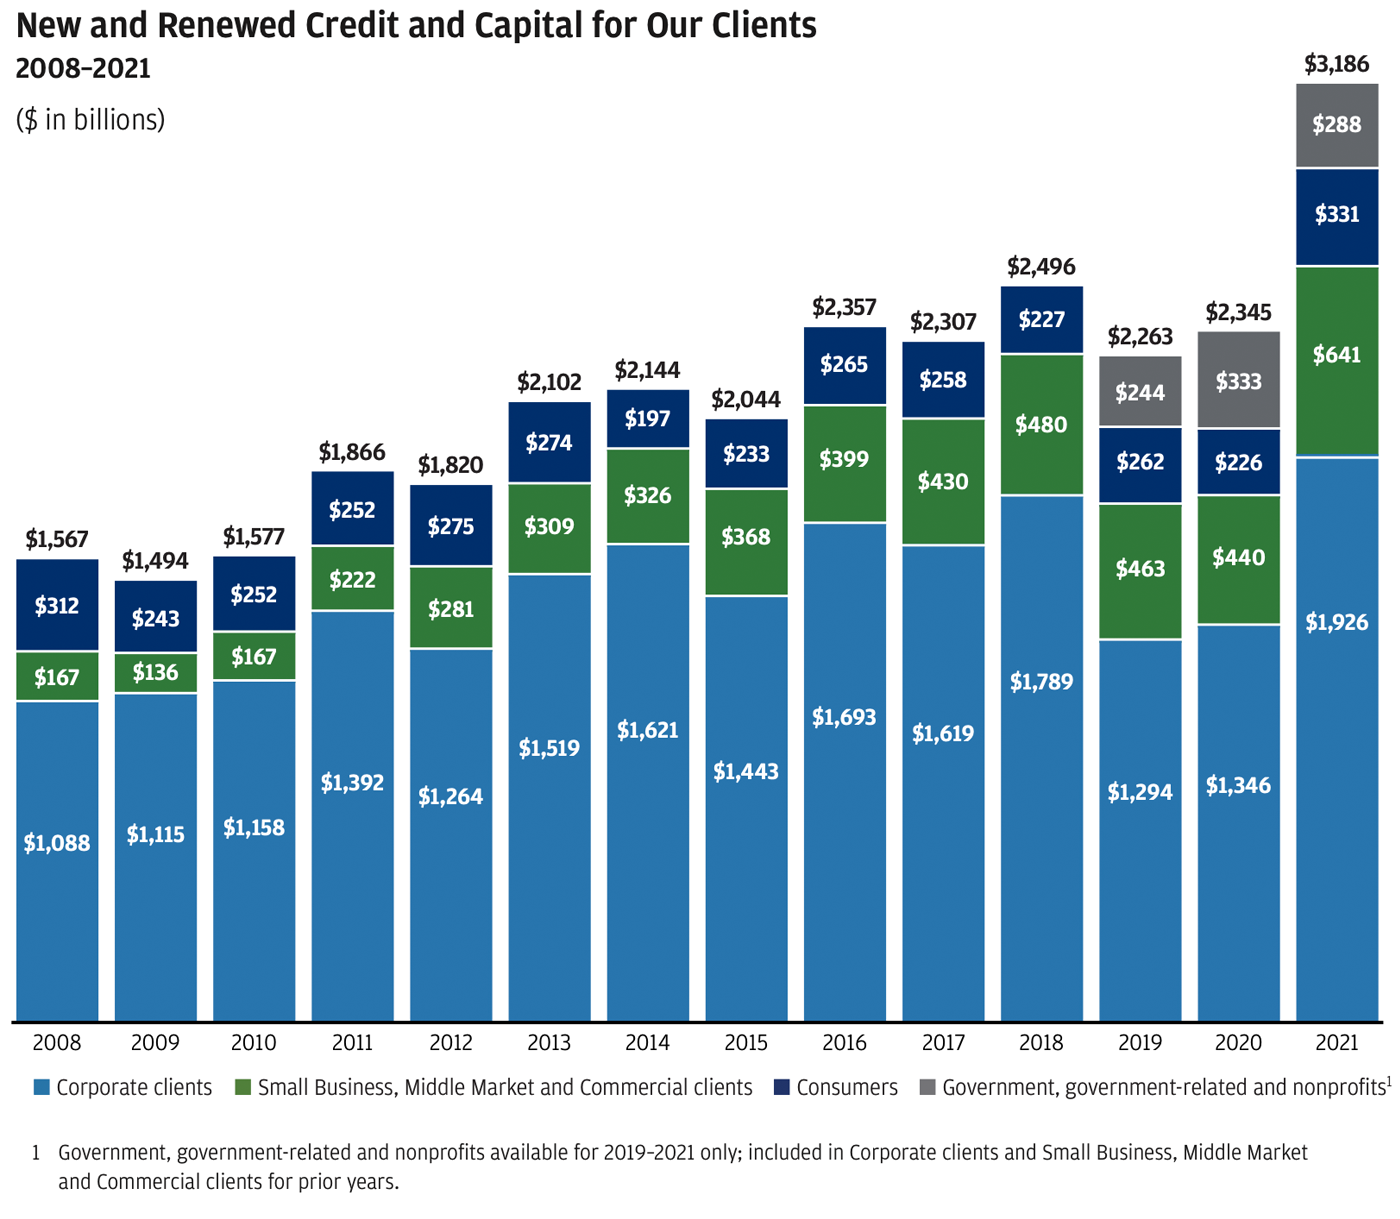 Stacked bar graph showing 2008 to 2021 trend of new and renewed credit and capital for our clients (split by Corporate clients, Small business / Middle Market / Commercial clients, Consumers, and Government / Government-related / nonprofits)